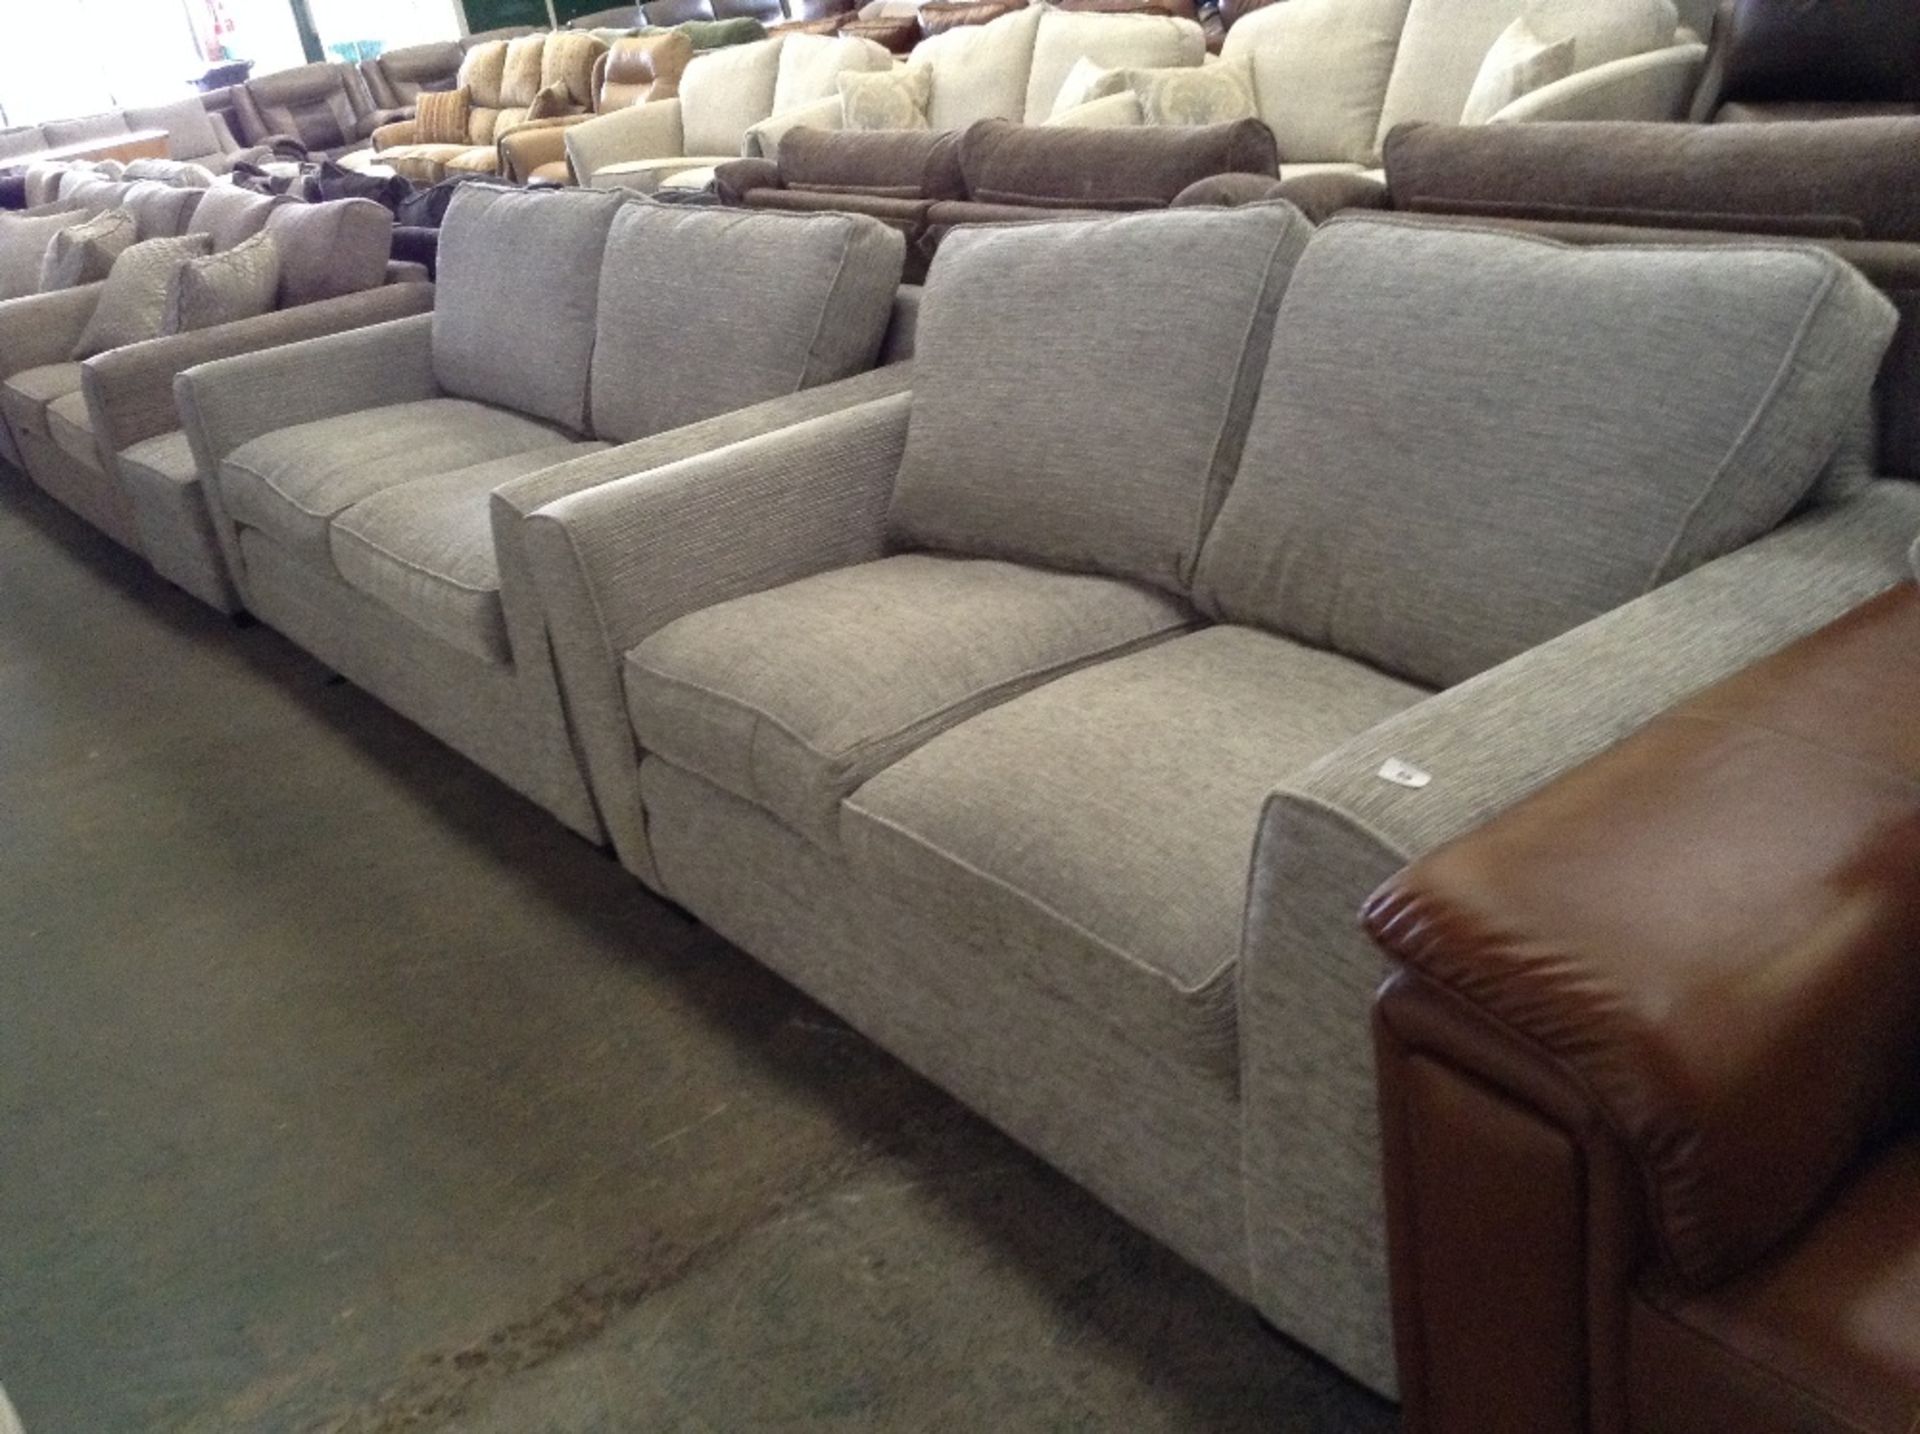 EGG SHELL 3 SEATER SOFA, 2 SEATER SOFA AND FOOTSTO